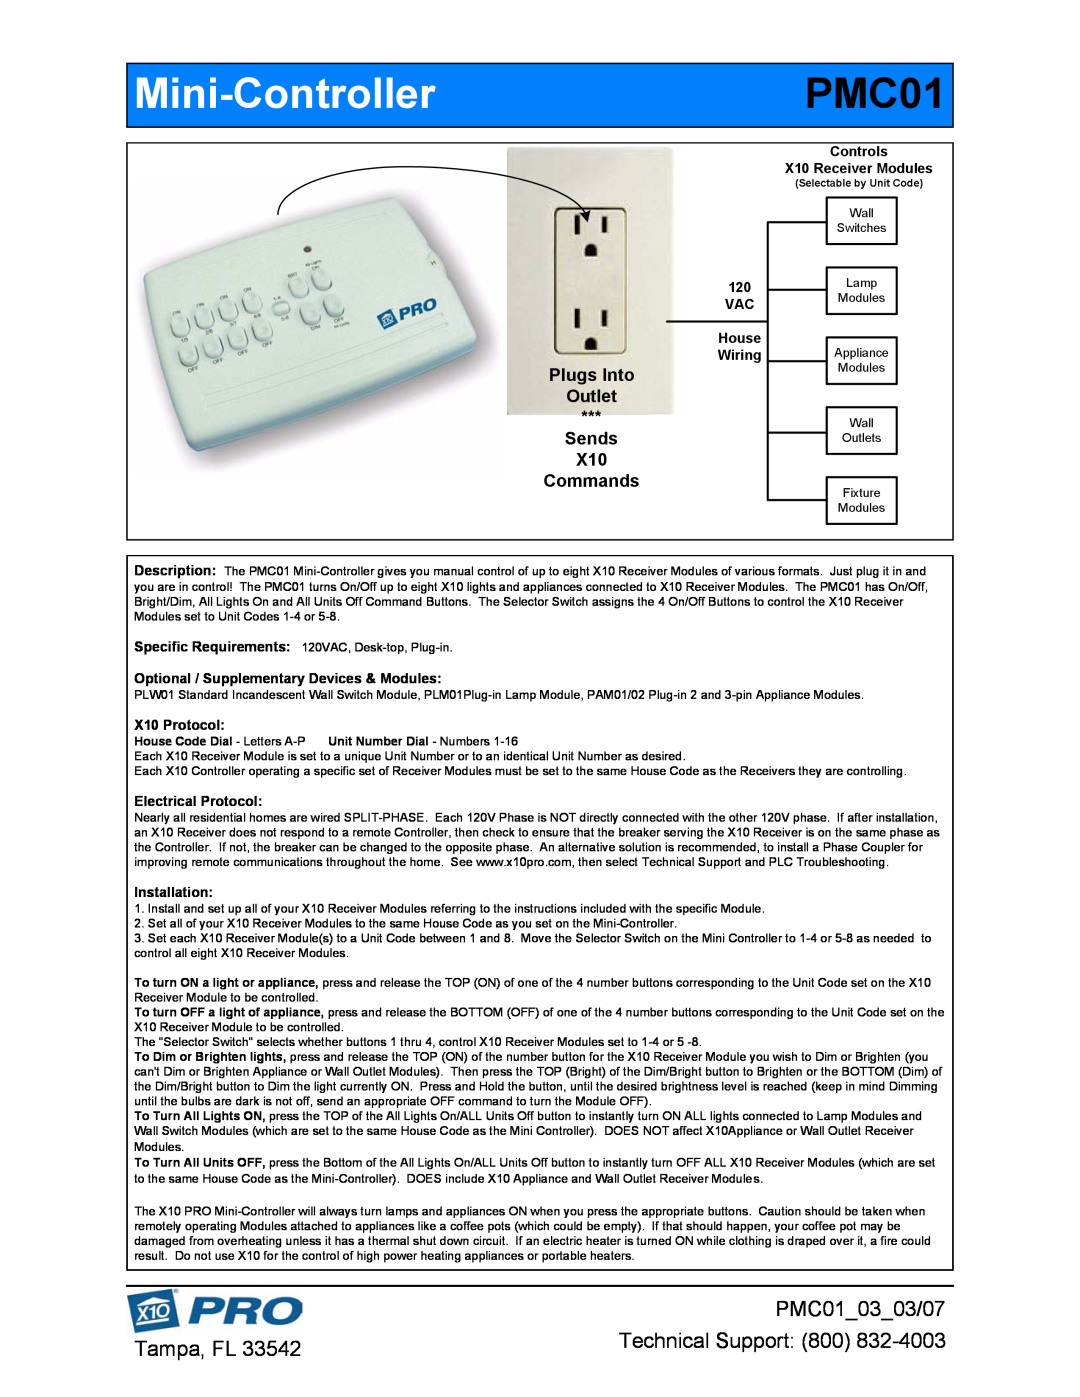 Pro-Tech manual Mini-ControllerPMC01, PMC010303/07, Tampa, FL, Technical Support 800, Plugs Into Outlet, X10 Protocol 